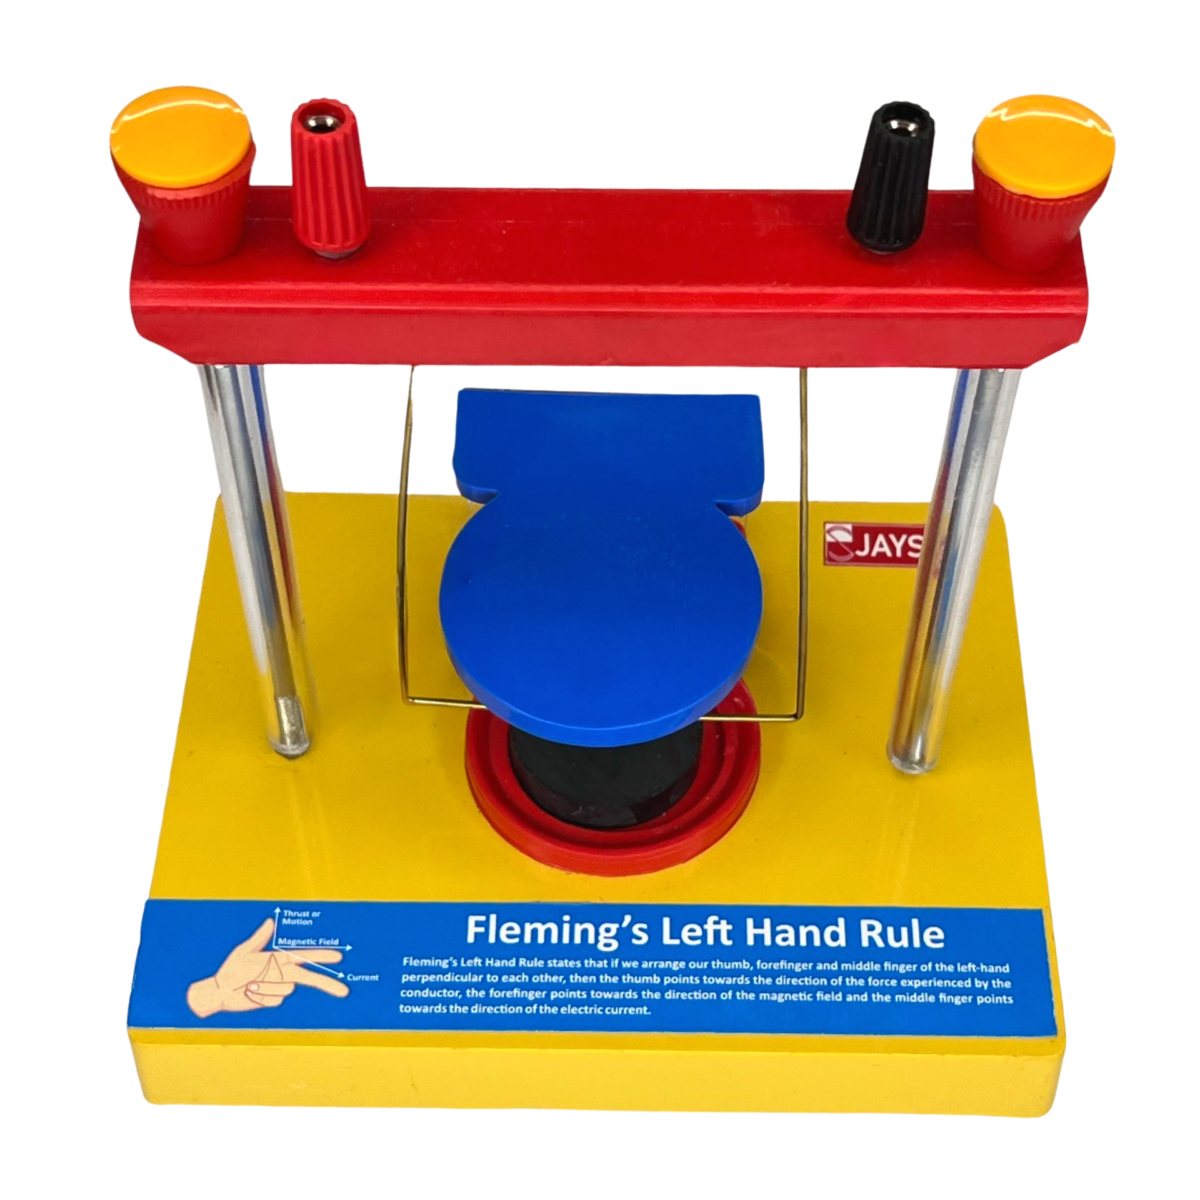 fleming's left hand rule apparatus